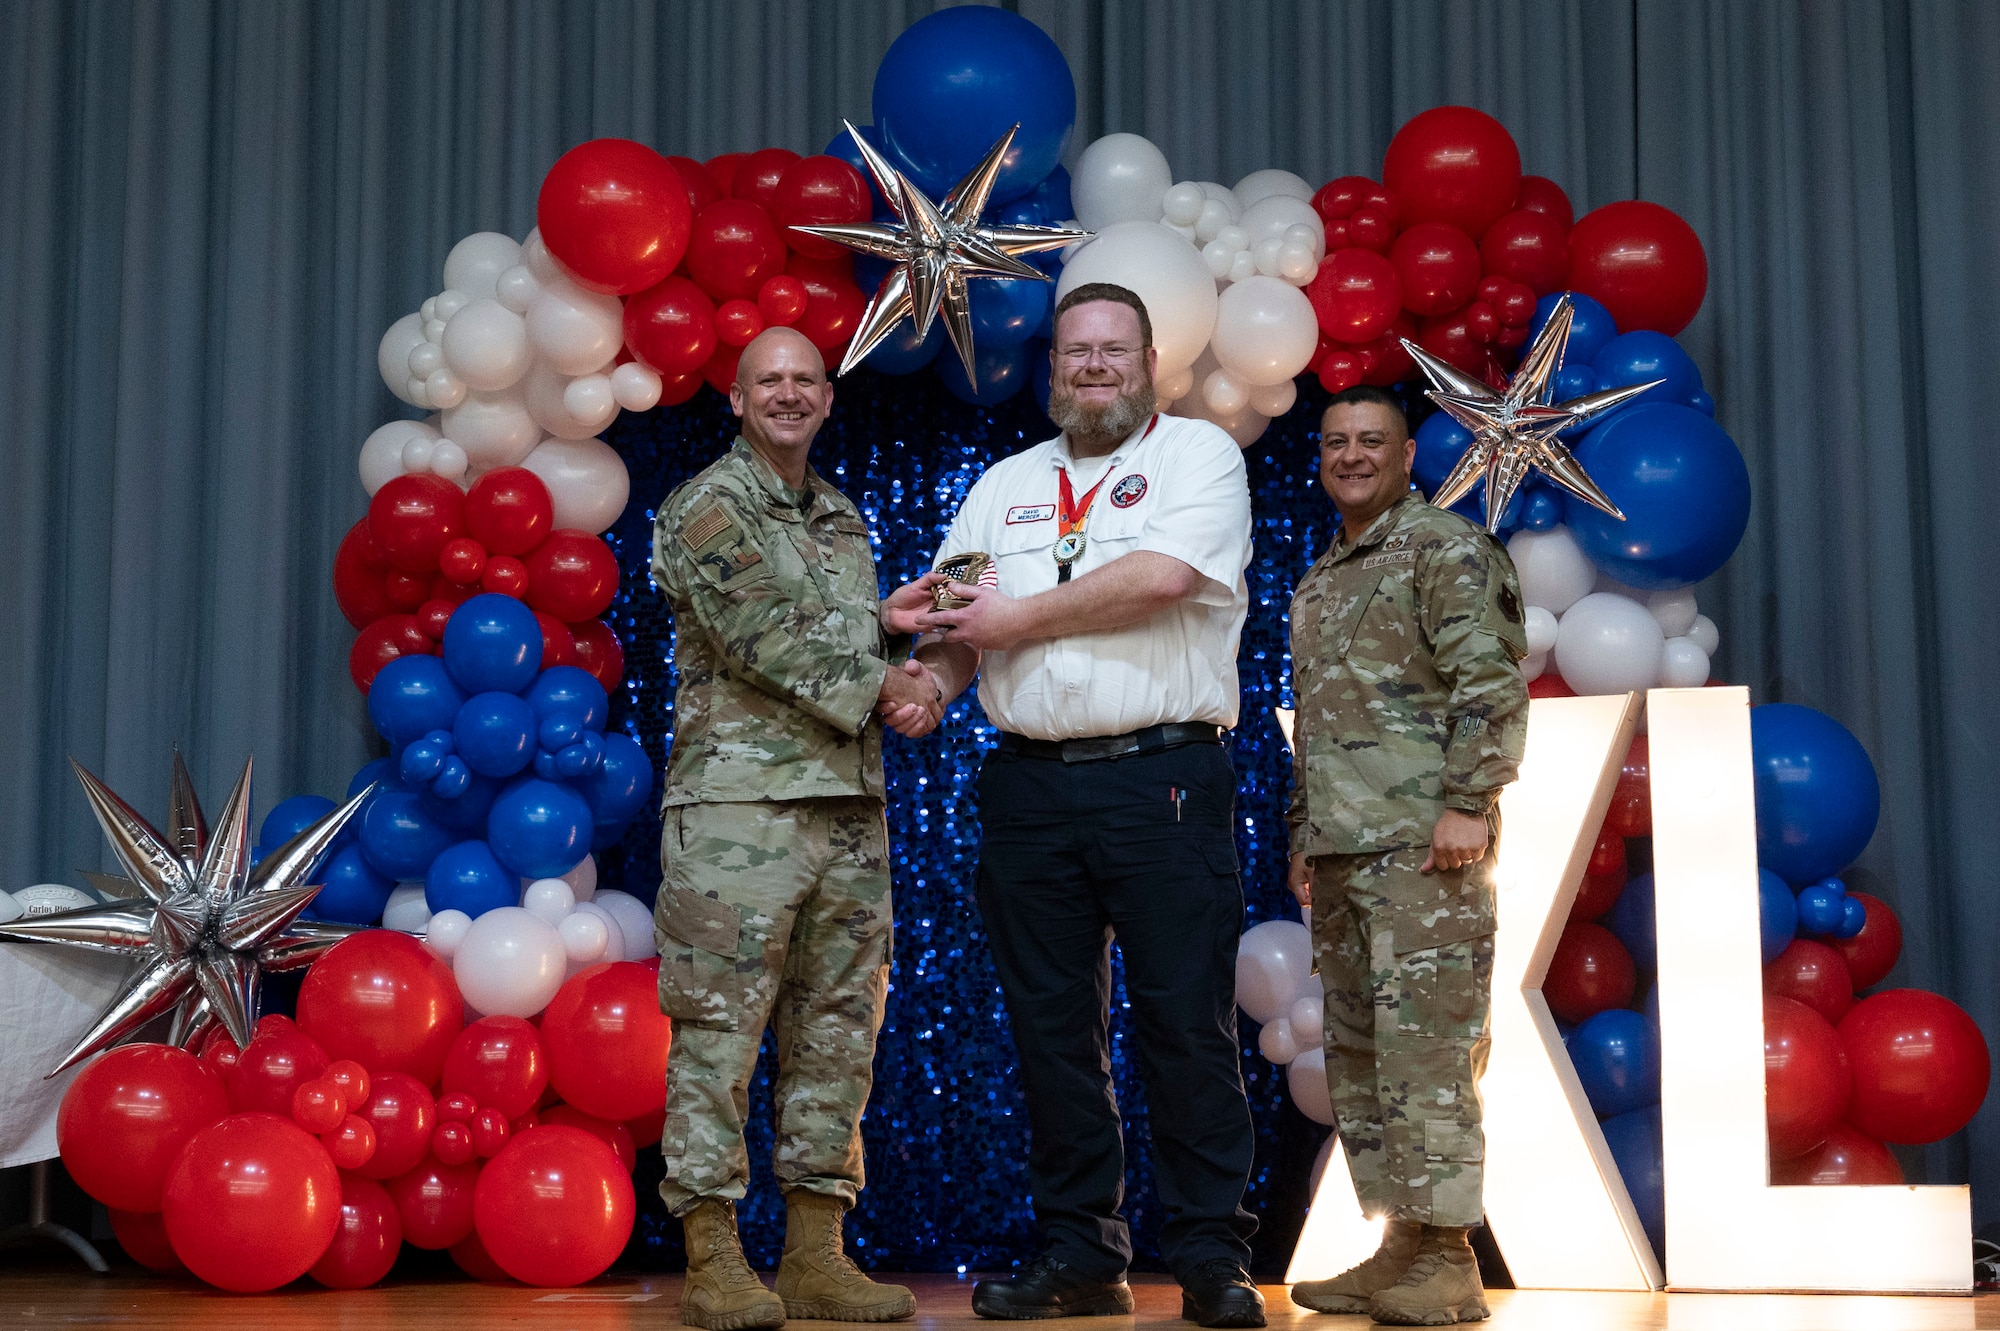 U.S. Air Force Col. Kevin Davidson, 47th Flying Training Wing (FTW) commander, and Chief Master Sgt. Lester Largaespada, 47th FTW command chief, present David Mercer, 47th Maintenance Directorate, an award during the 2023 47th FTW Annual Awards Ceremony at Laughlin Air Force Base, Texas, Feb. 2, 2024. The annual awards recognized the top performers throughout the 47th Flying Training Wing during fiscal year 2023. (U.S. Air Force photo by Senior Airman Kailee Reynolds)